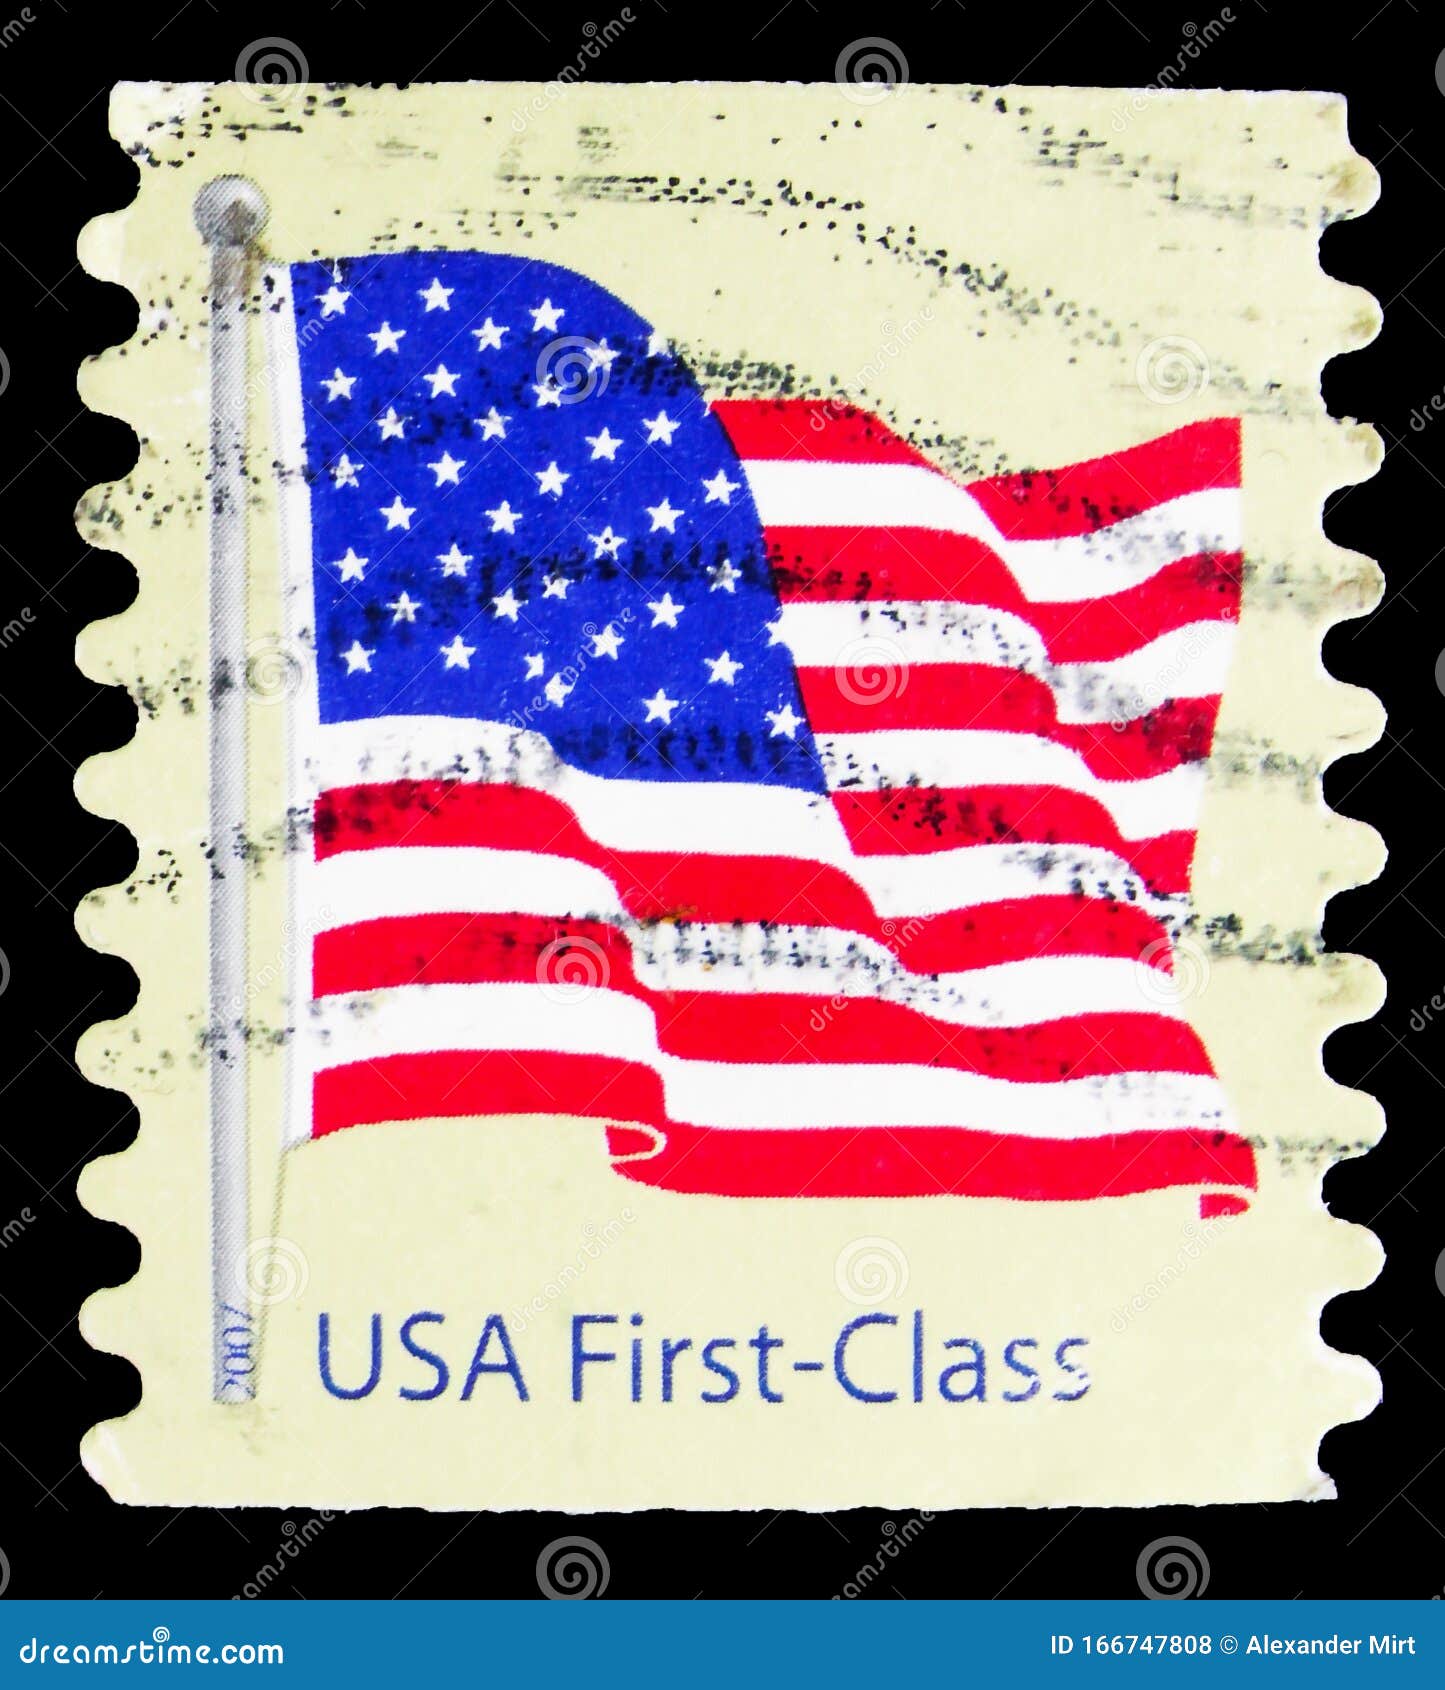 Top 101+ Images american flag stamp with no value printed Stunning